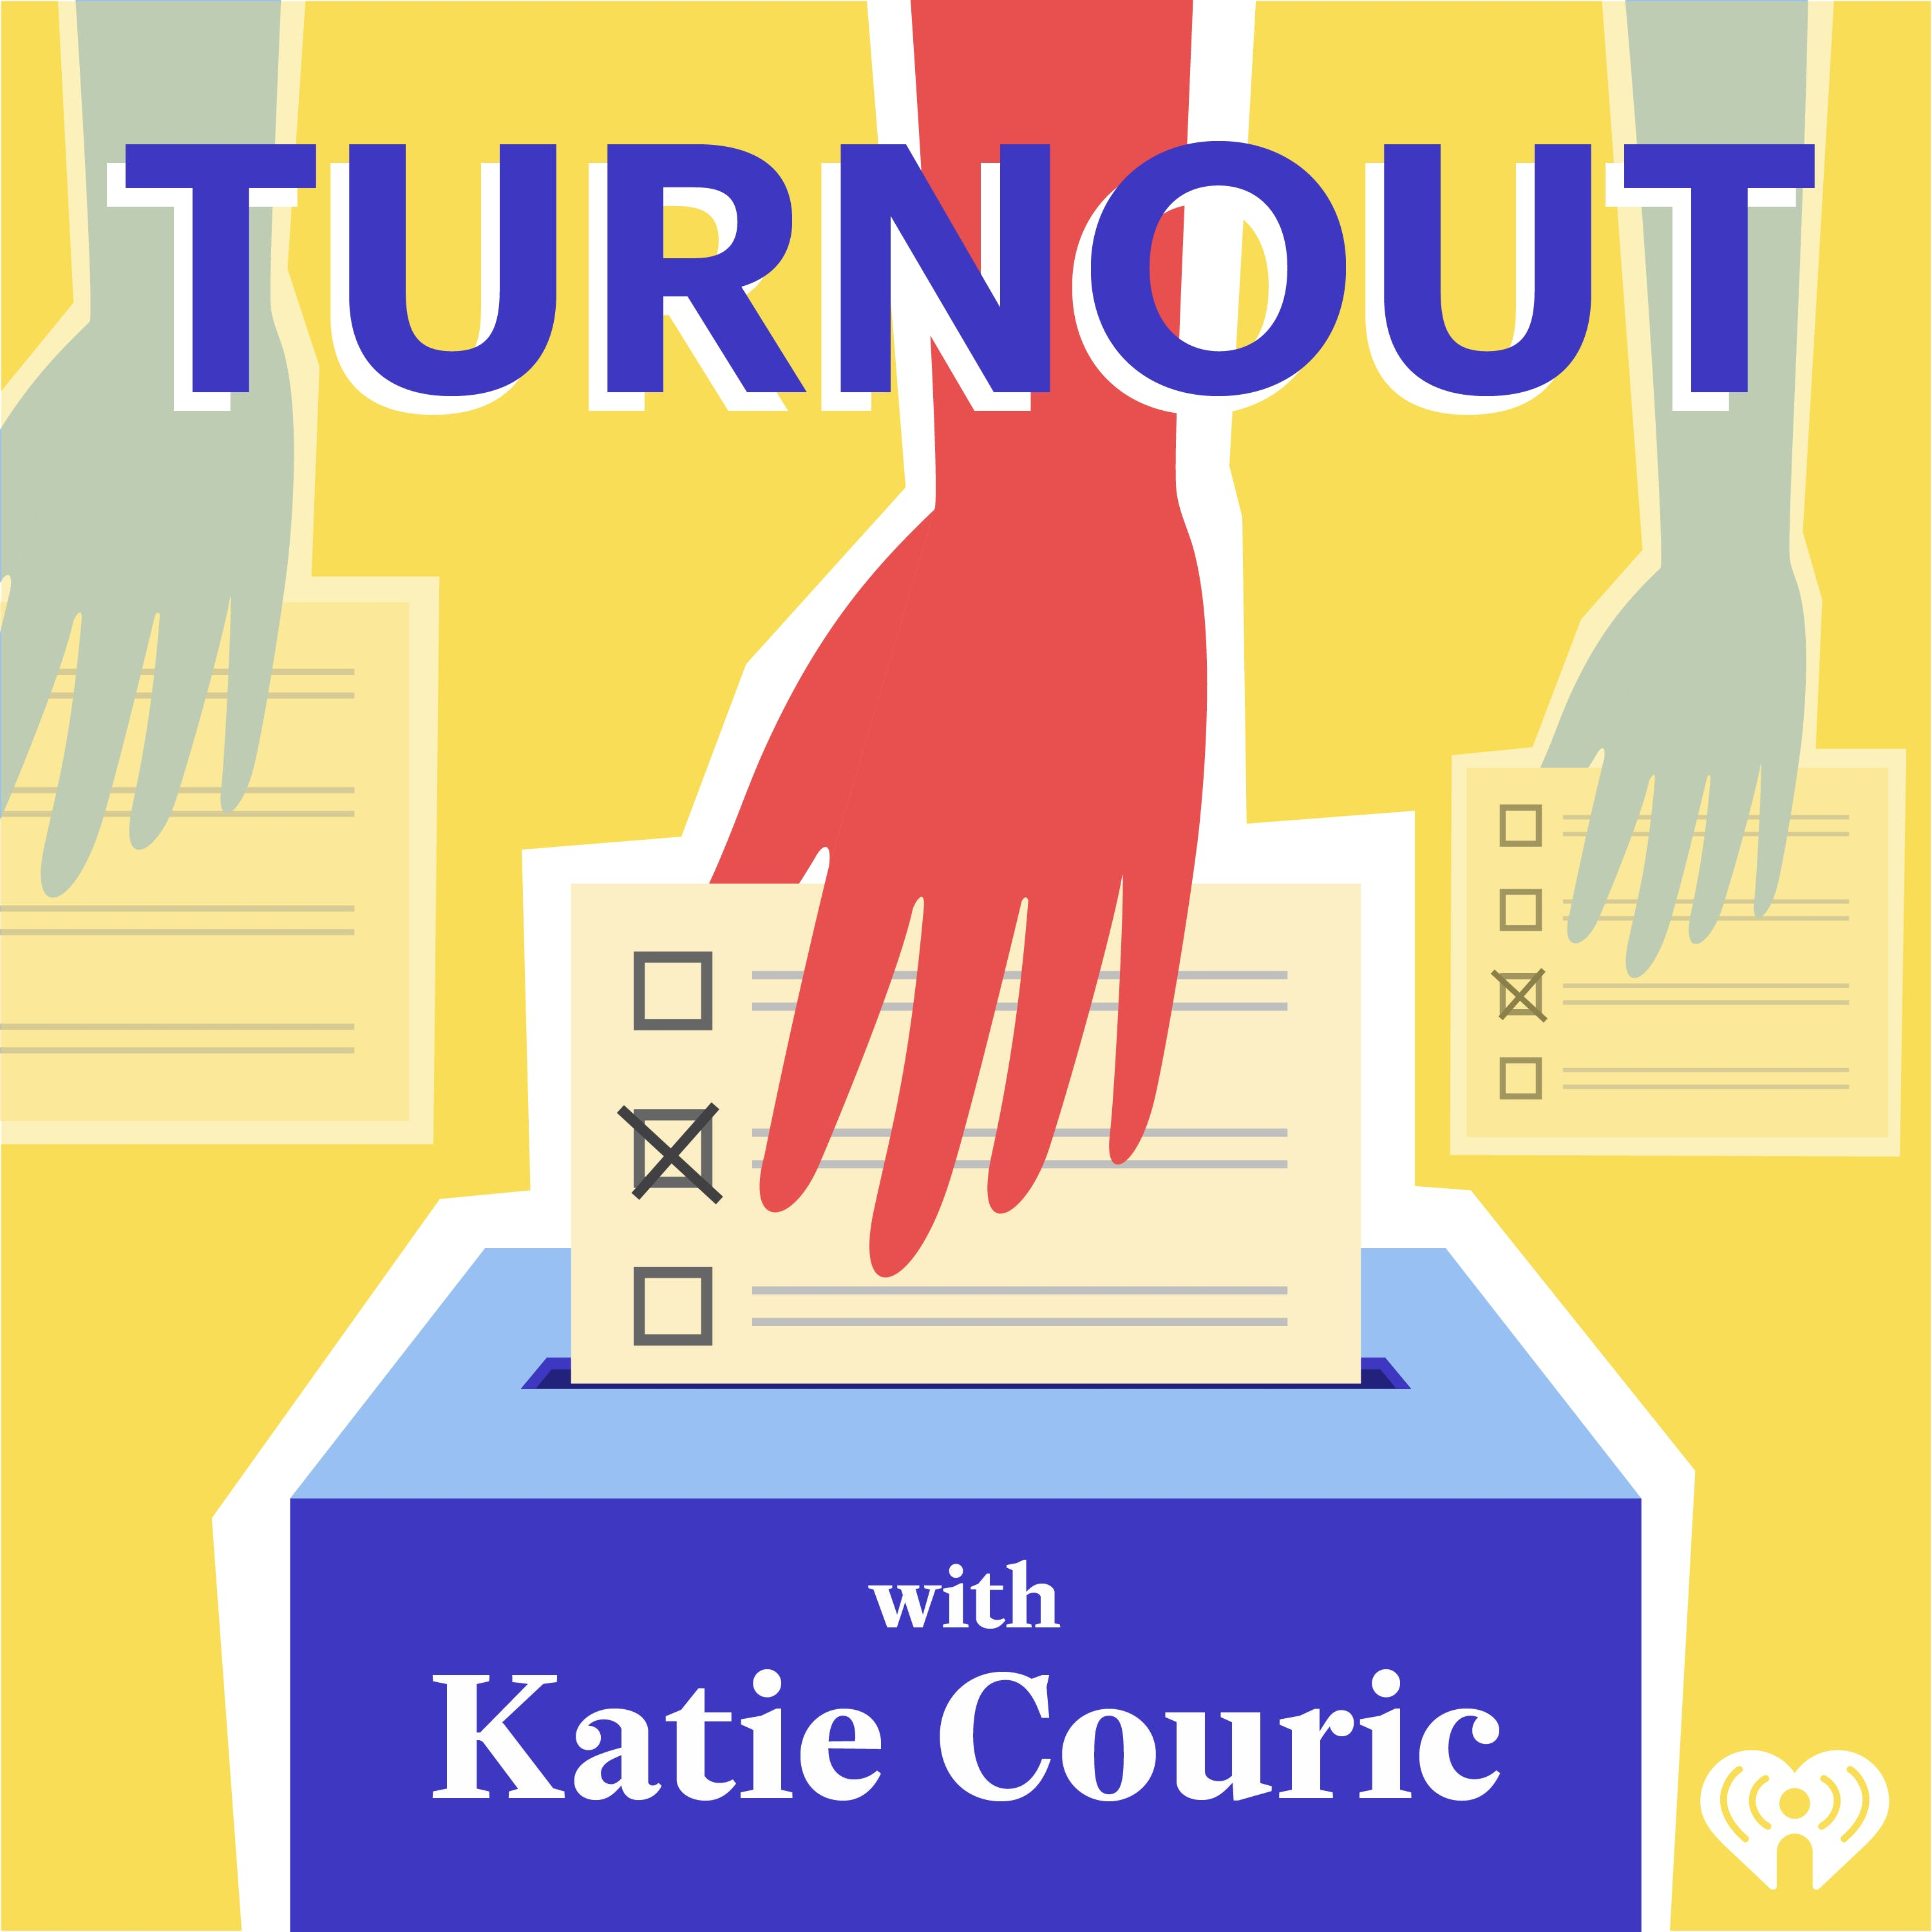 Introducing: Turnout with Katie Couric